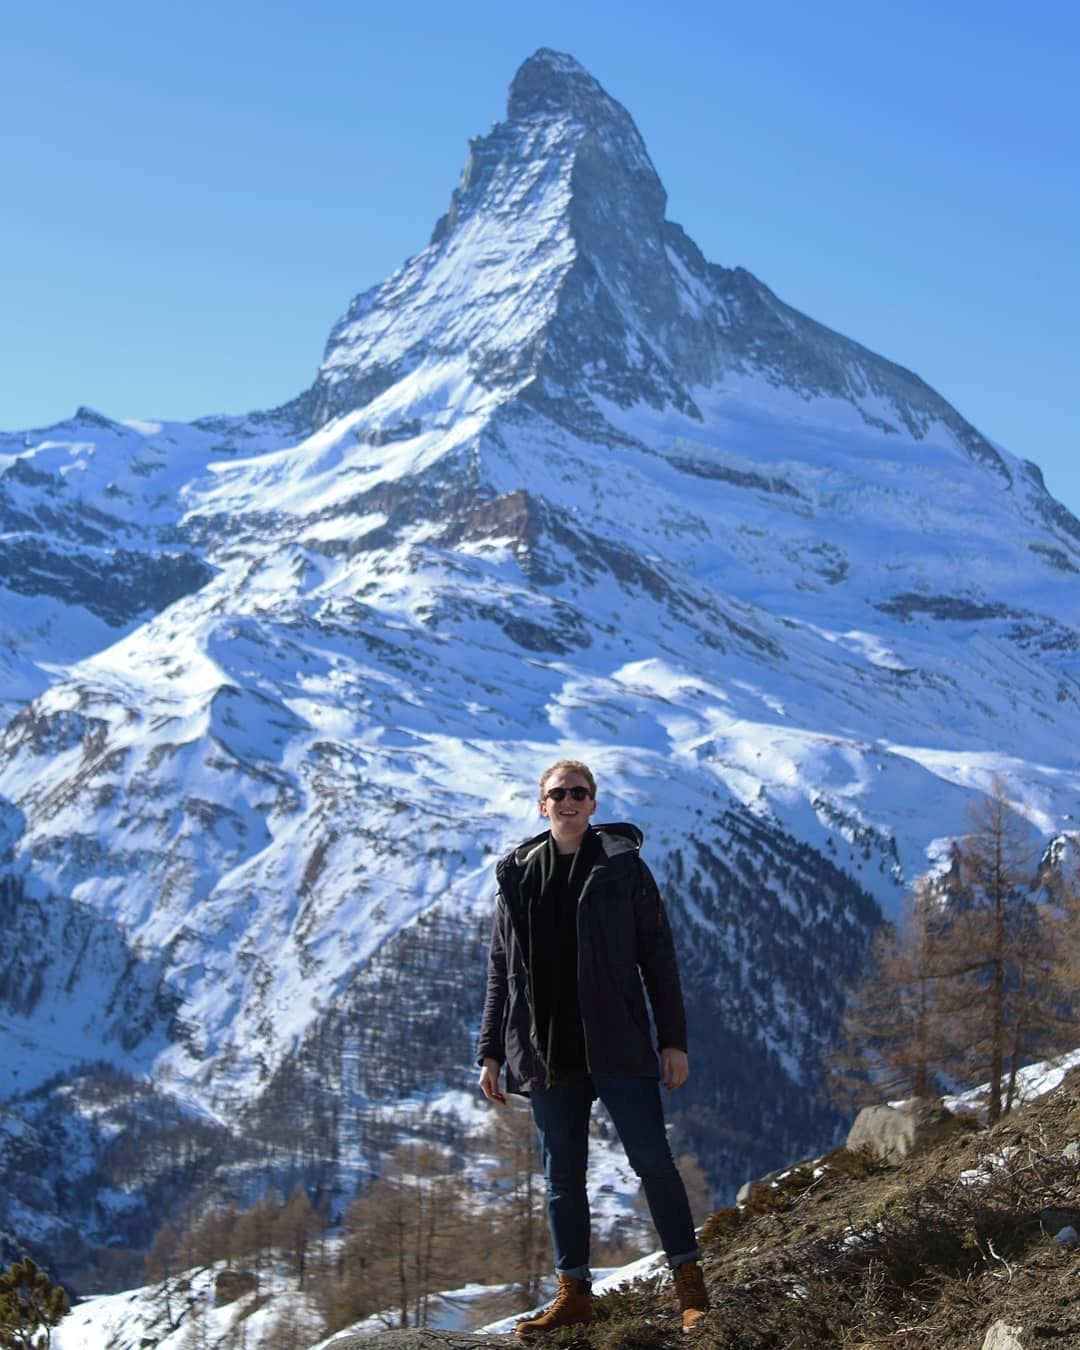 4. 2020. Matterhorn. I love Switzerland and how easy it is to get outdoors and explore.